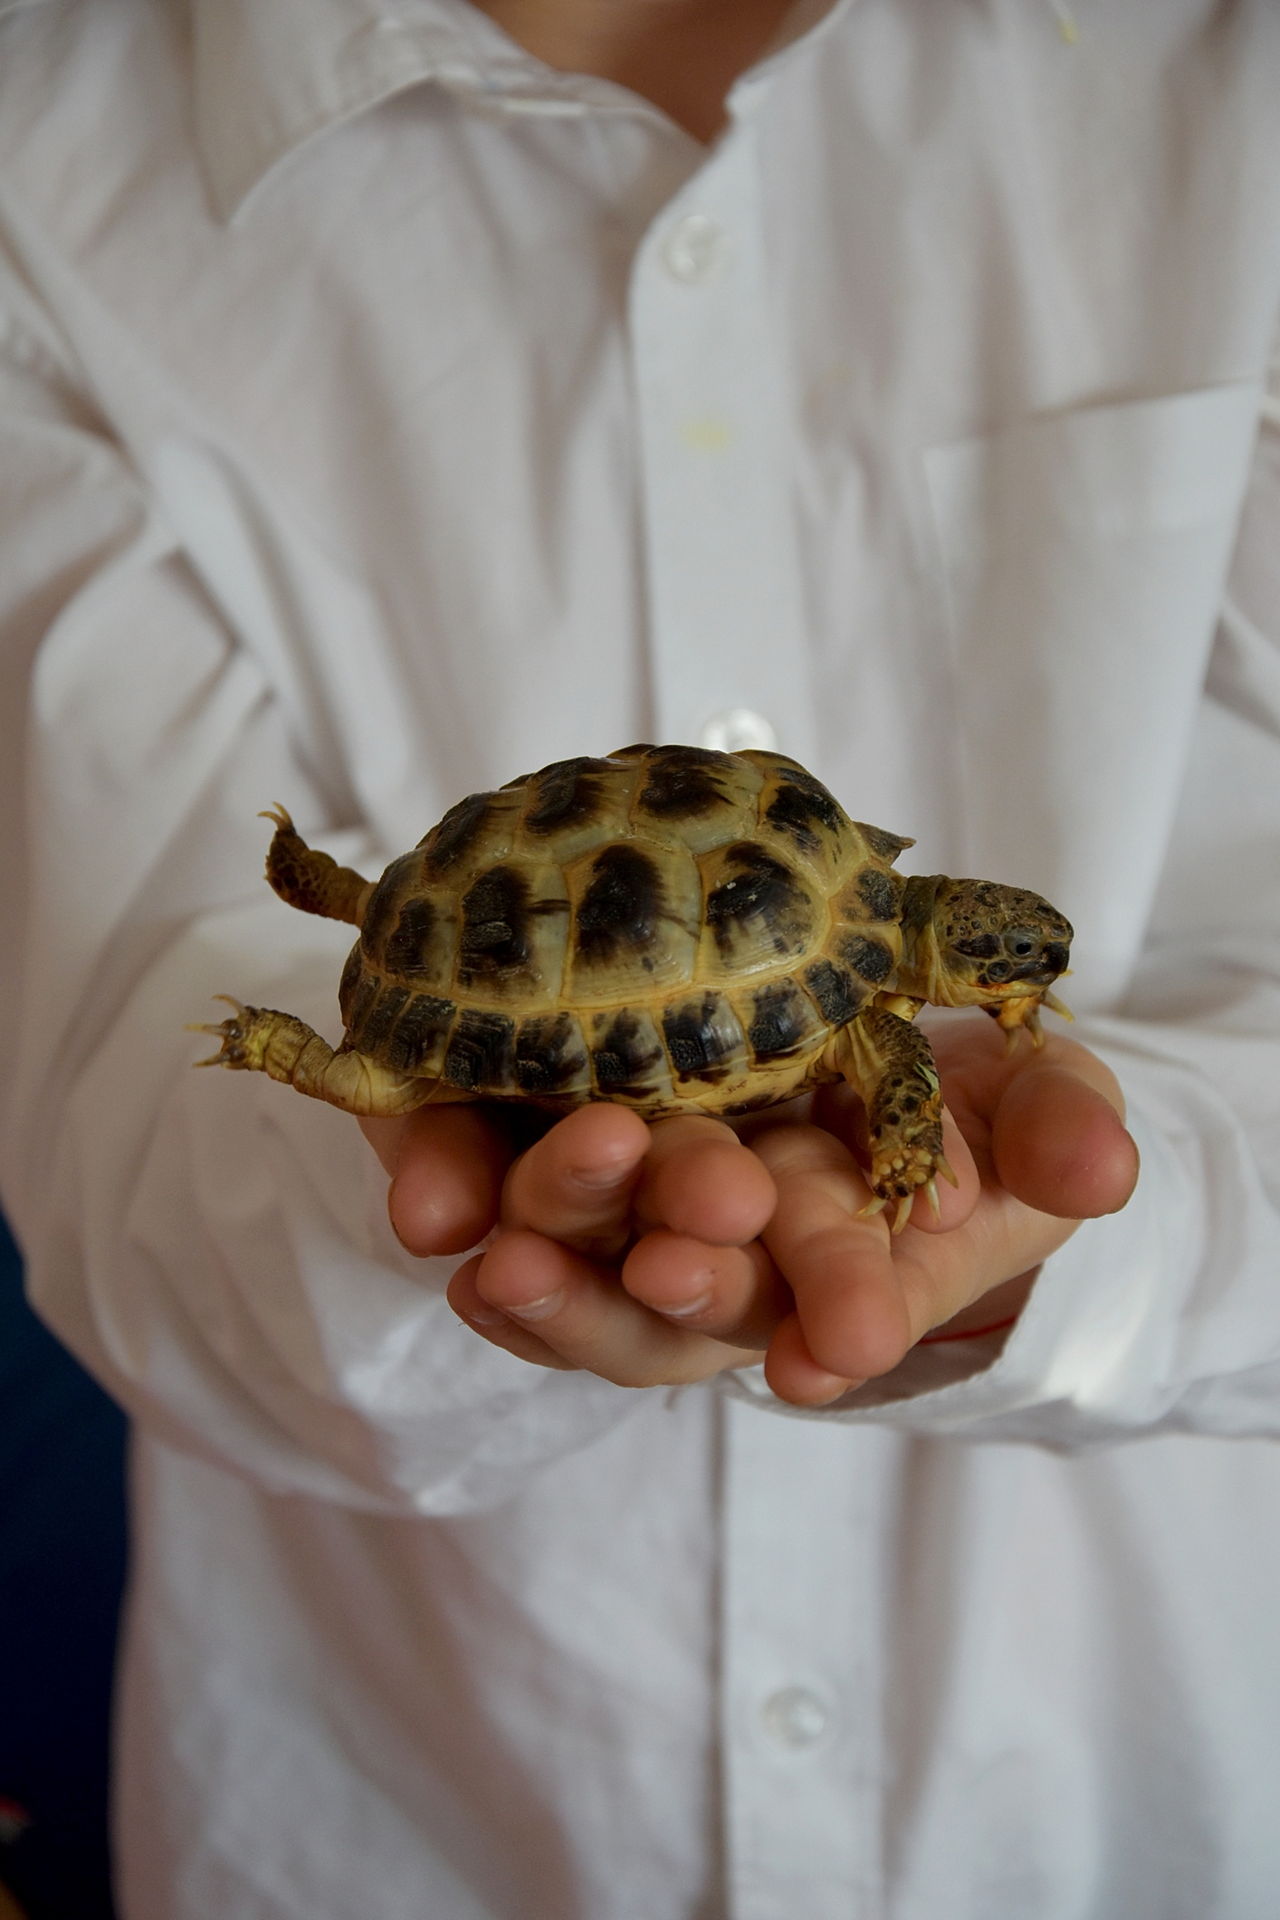 40 Best Photos Best Pet Tortoise That Stay Small : Best Reptile Pet for Kids and Small Children | Reptile ...